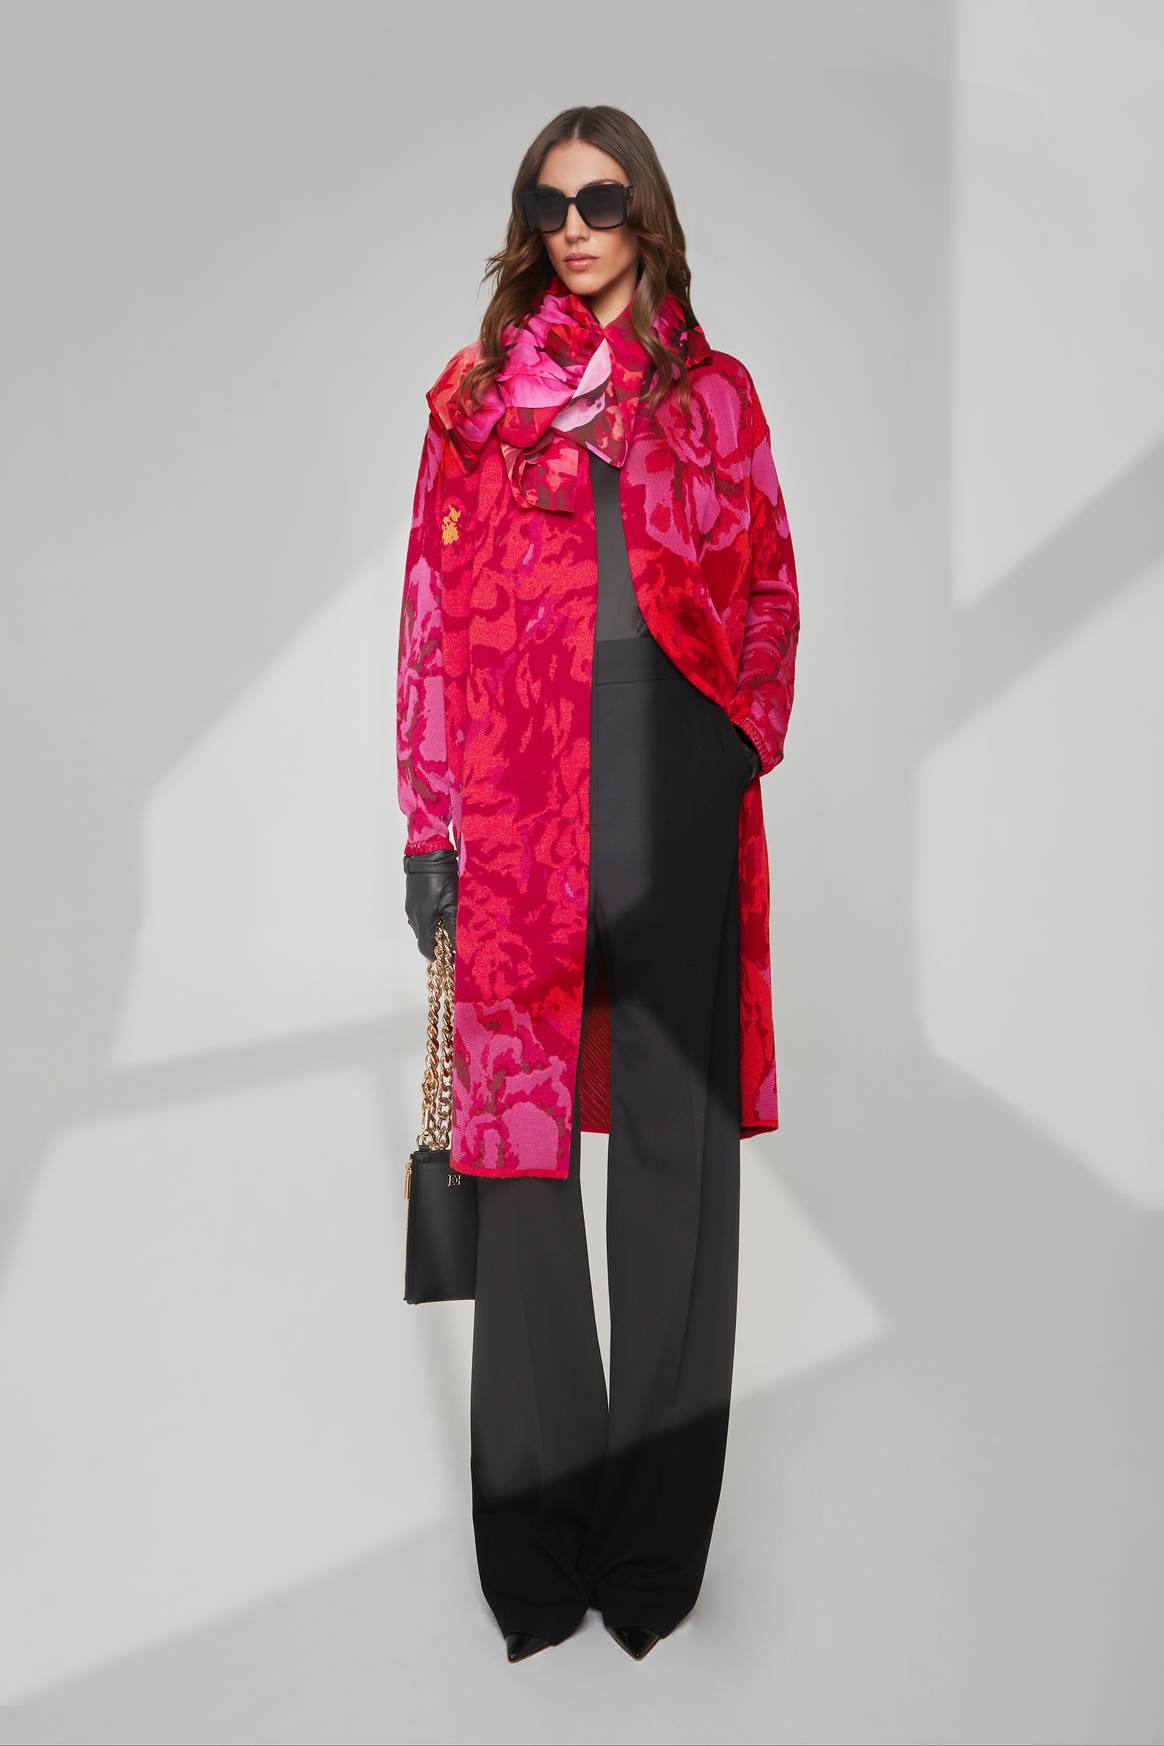 Picture: ESCADA, FW22 Collection, courtesy of the brand